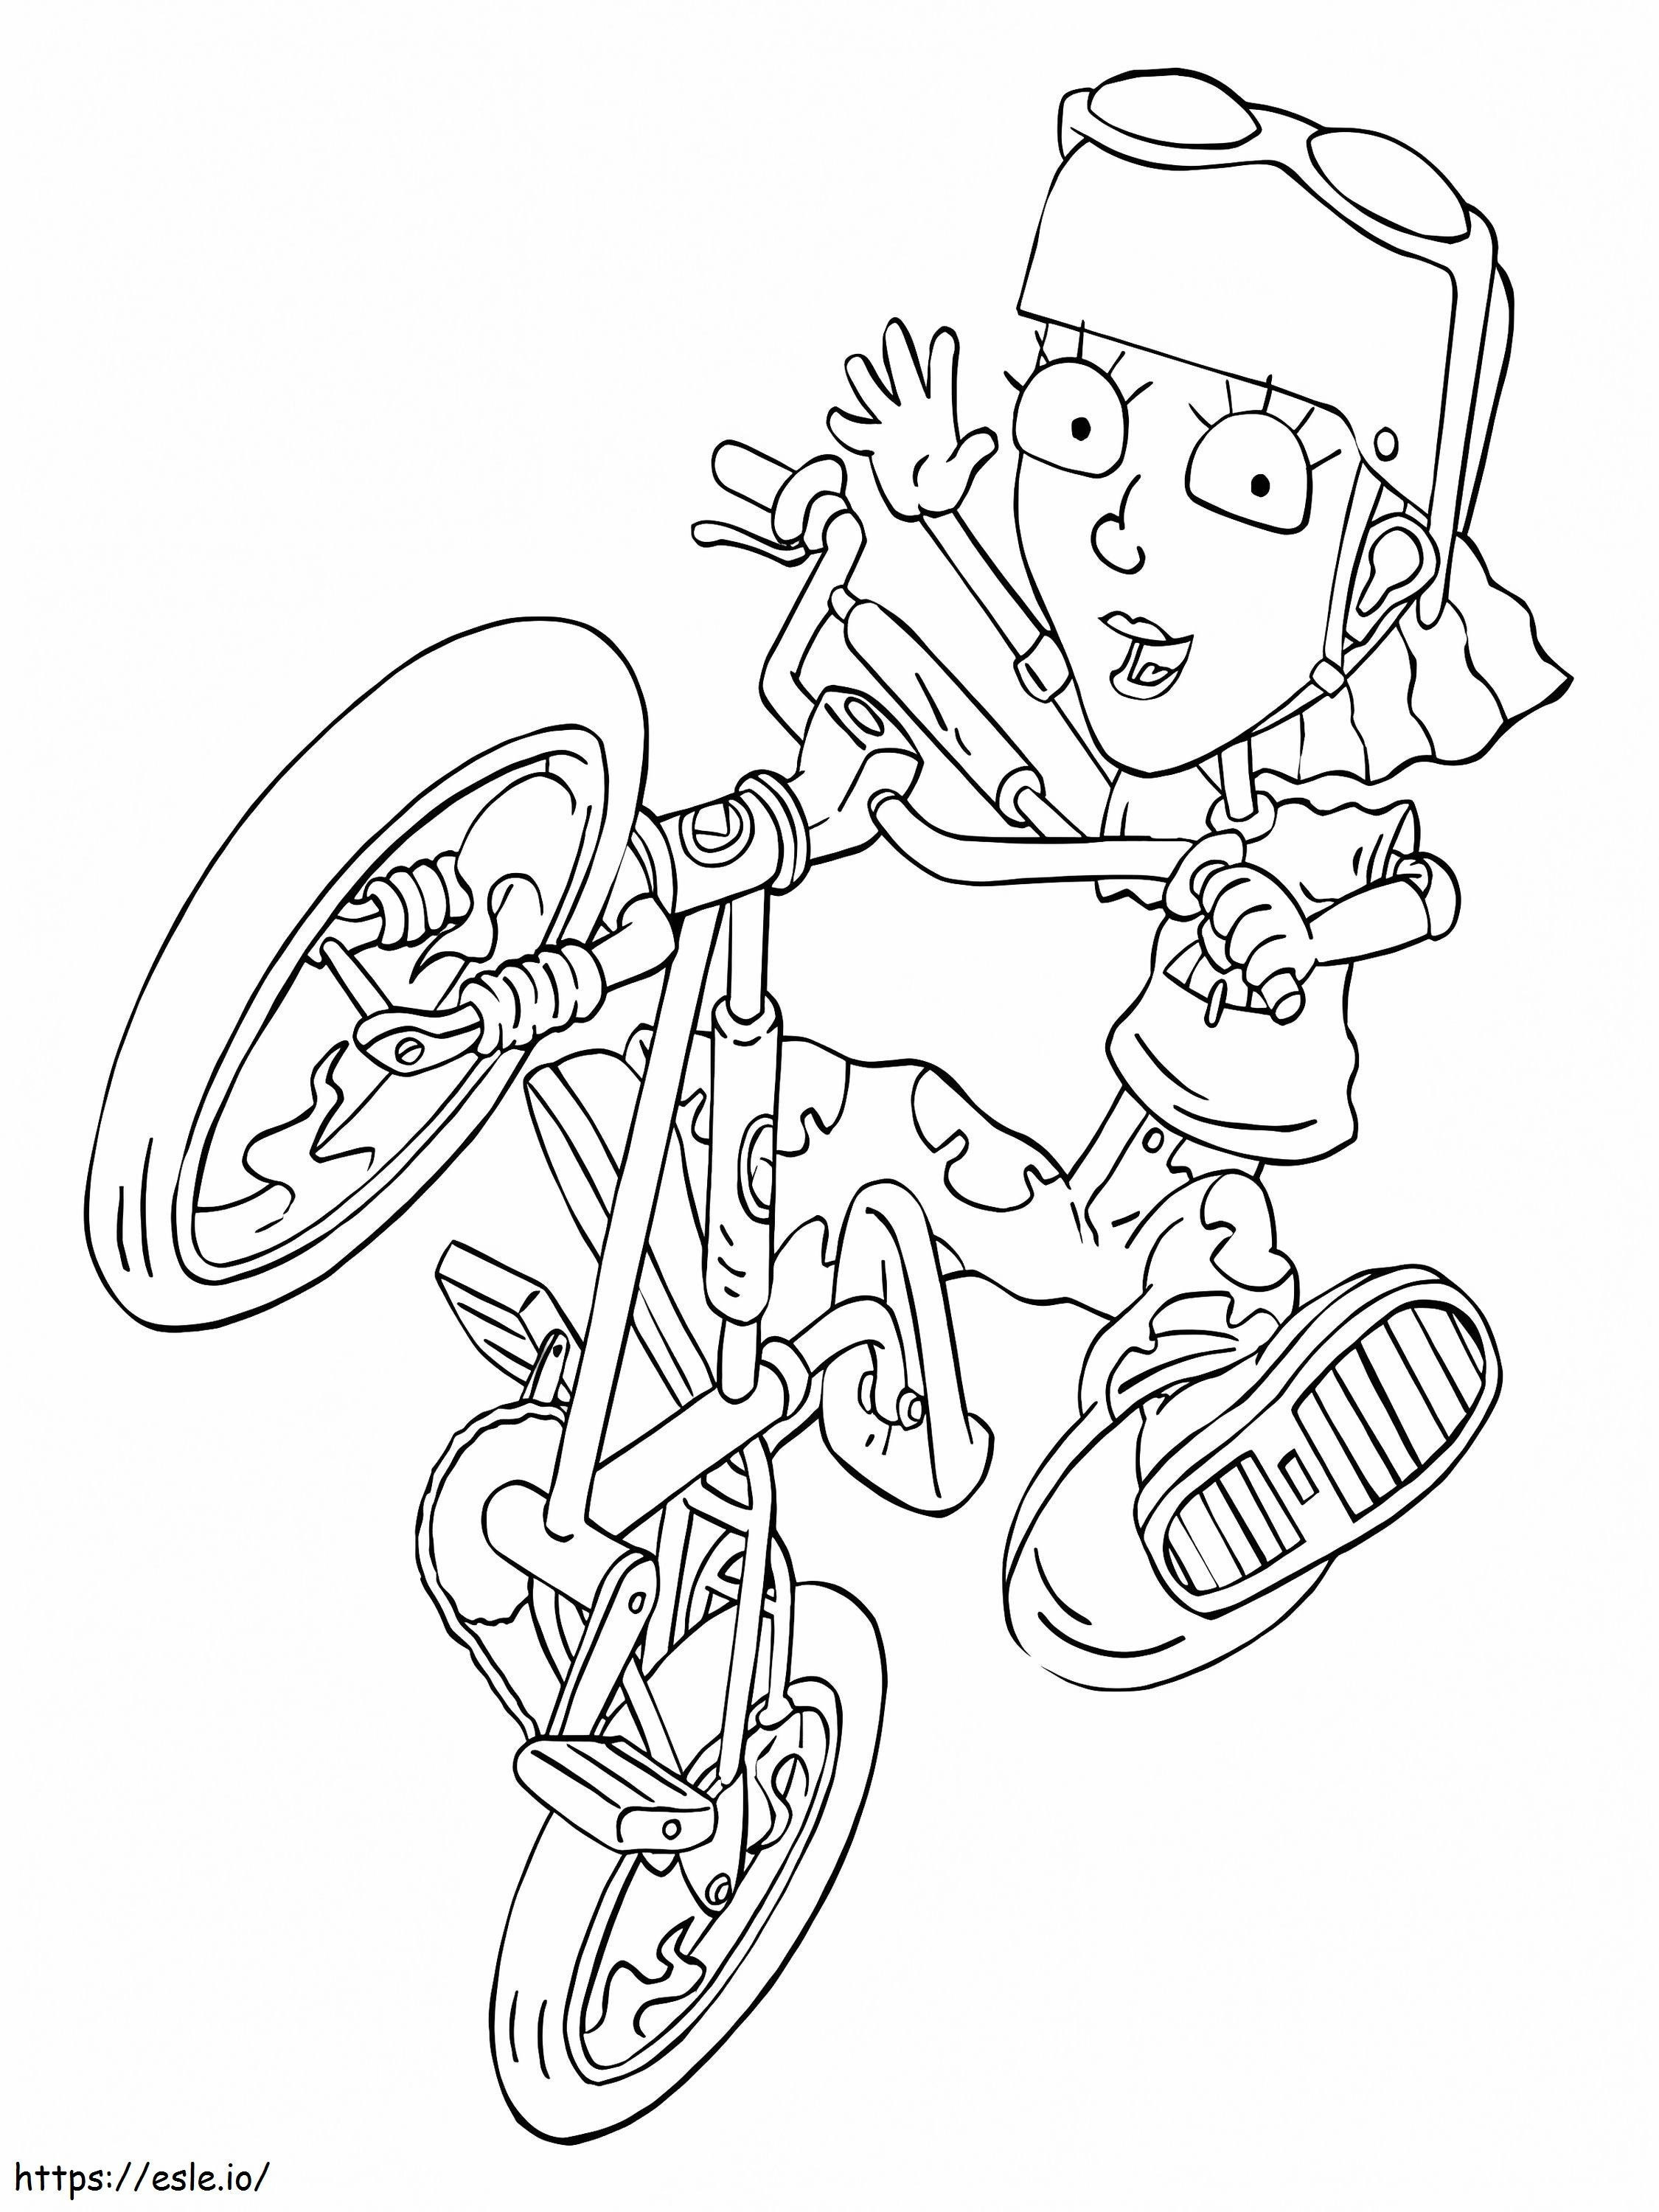 Rocket Power 3 coloring page